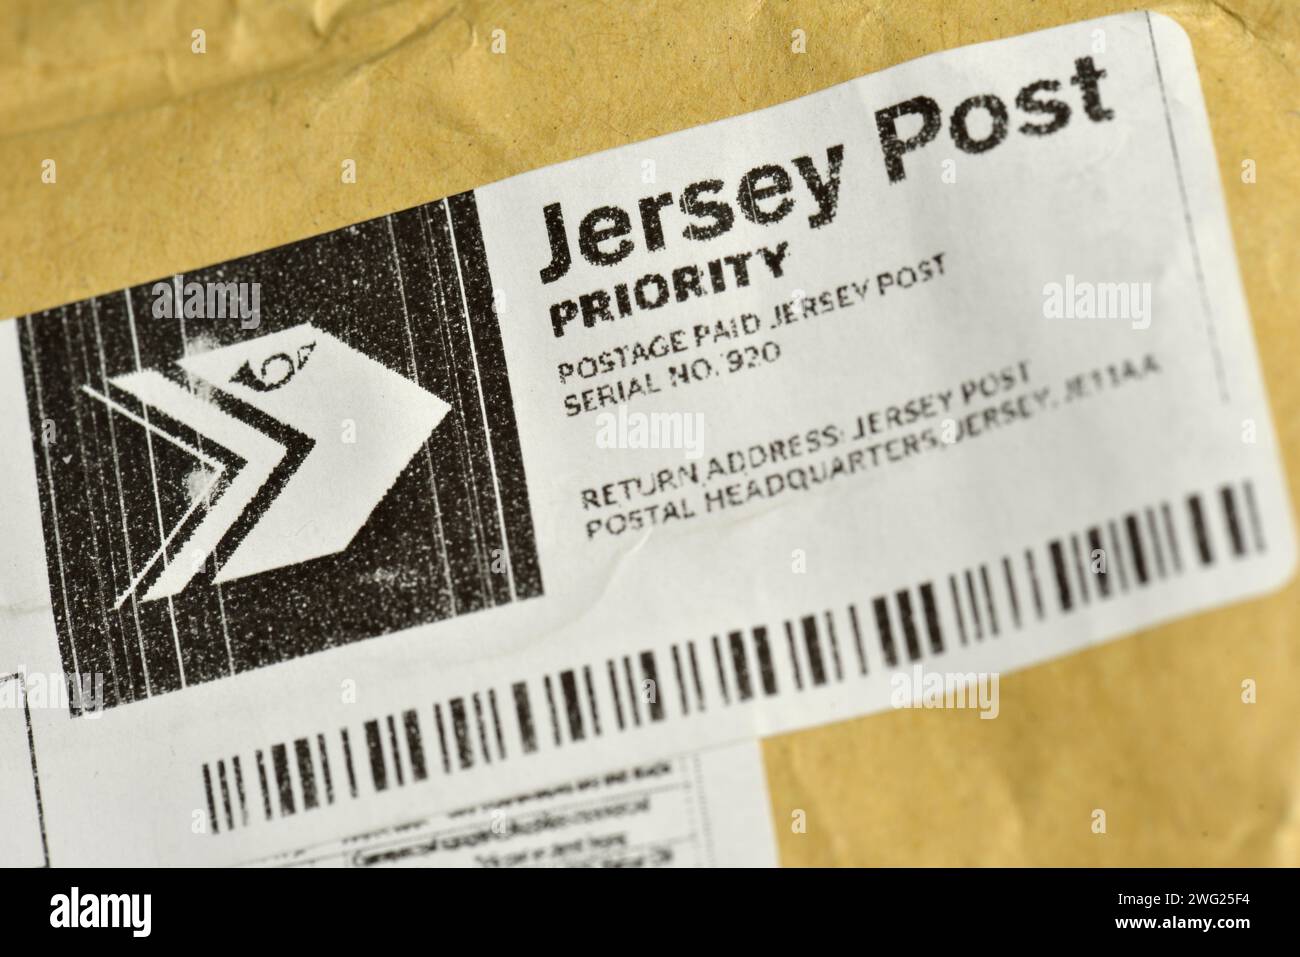 Jersey Post priority postage paid envelope with return address to postal headquarters in Jersey Stock Photo